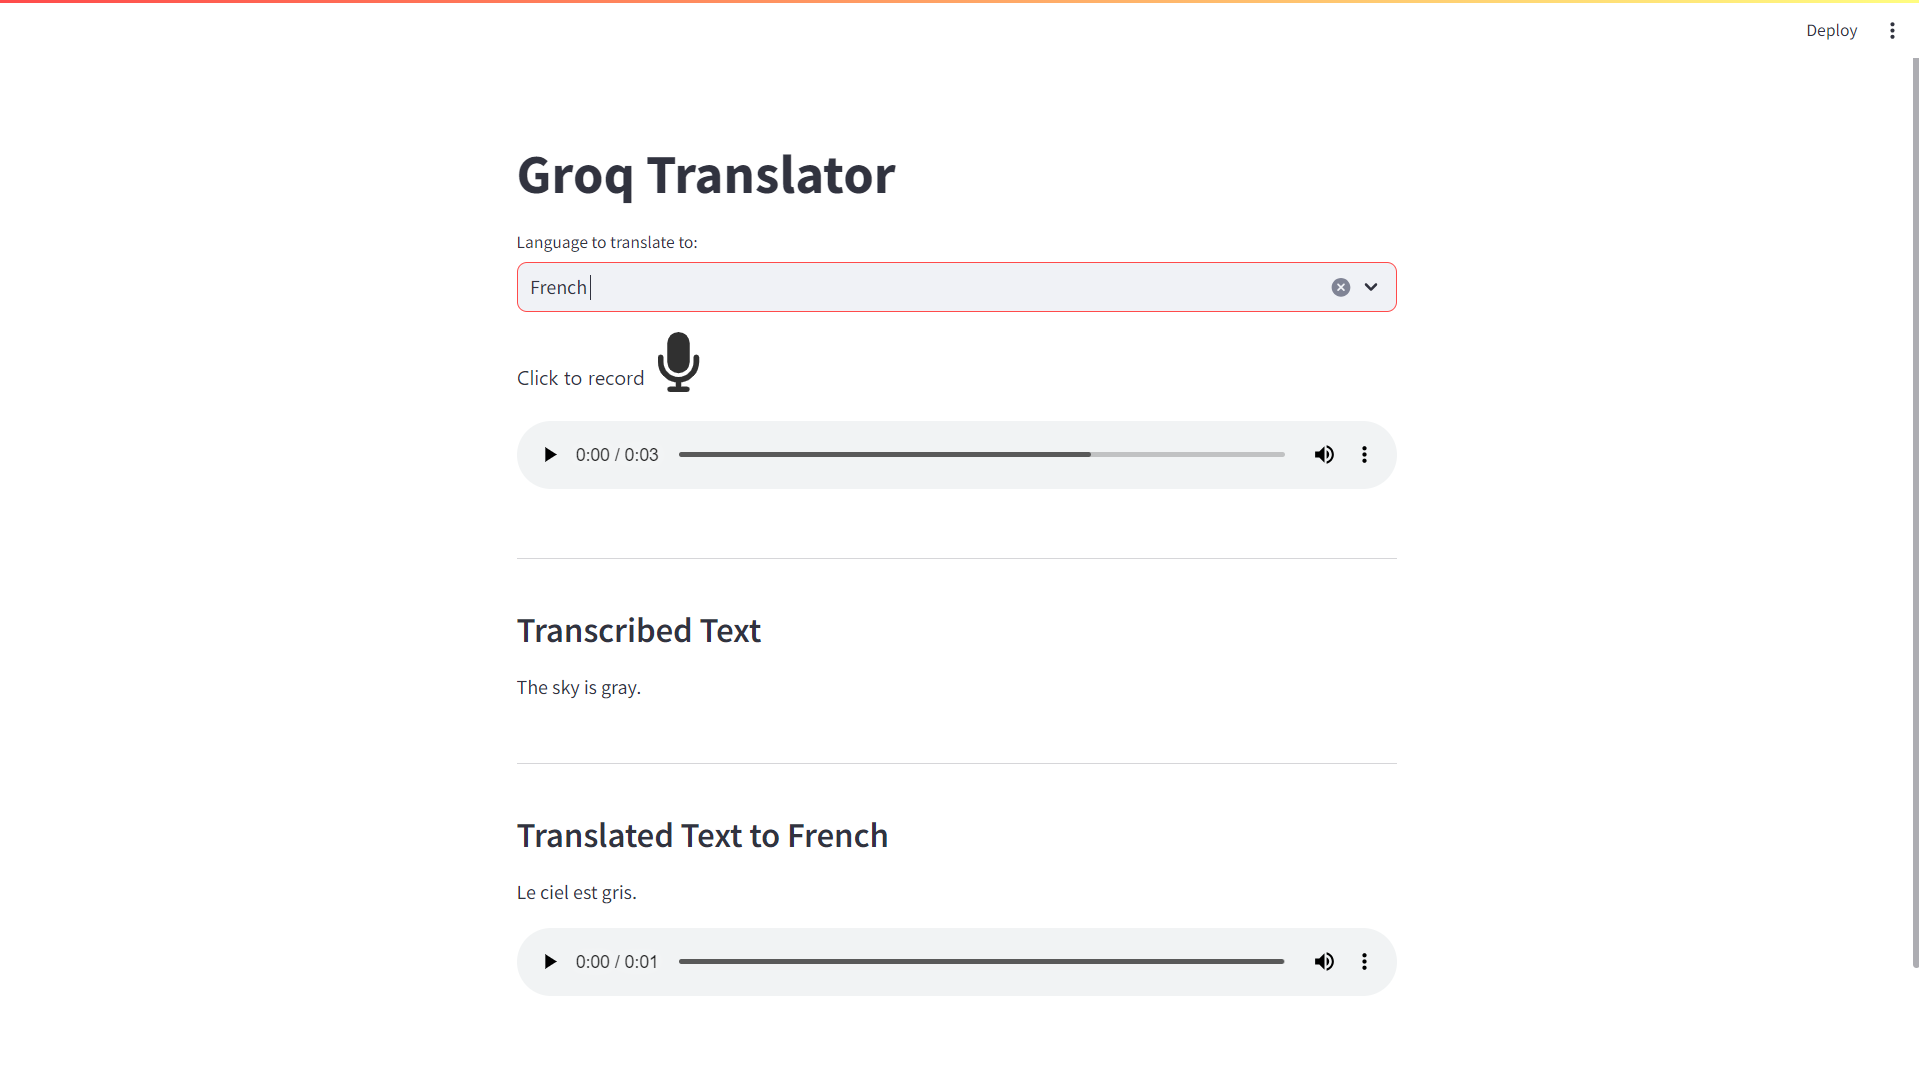 Translating to French